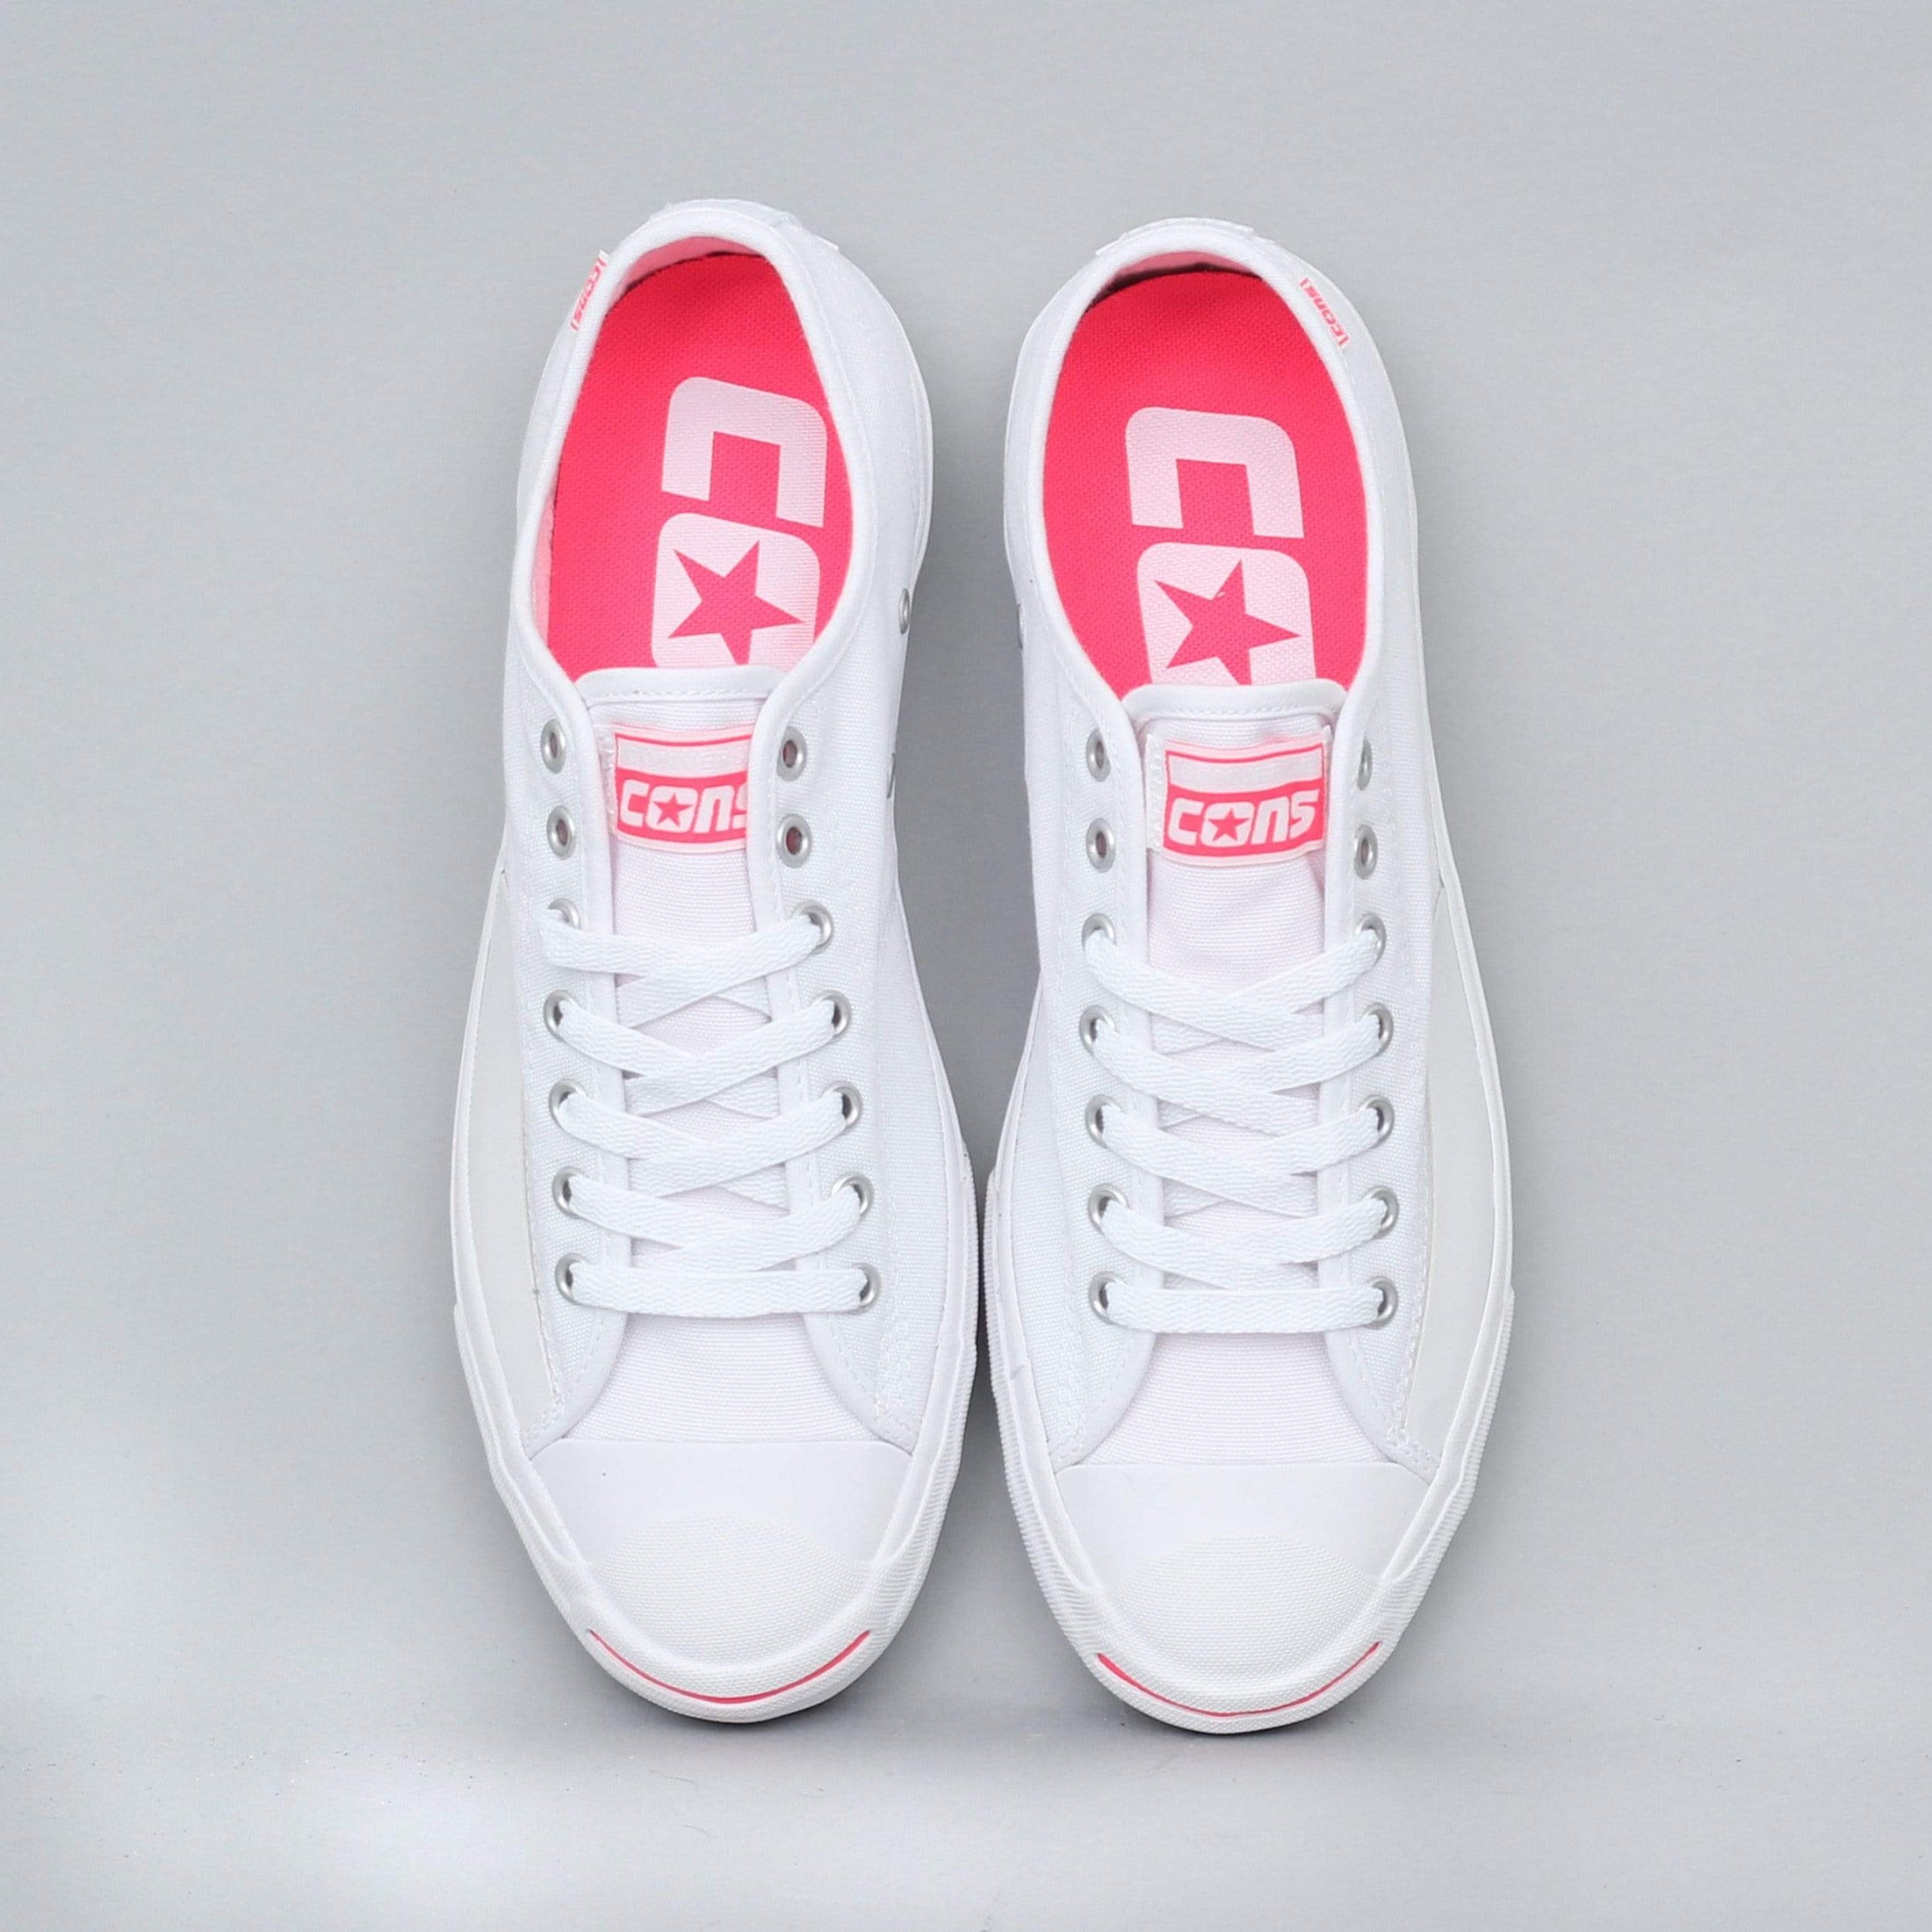 Converse Jack Purcell Pro OP OX Shoes White / Racer Pink / White